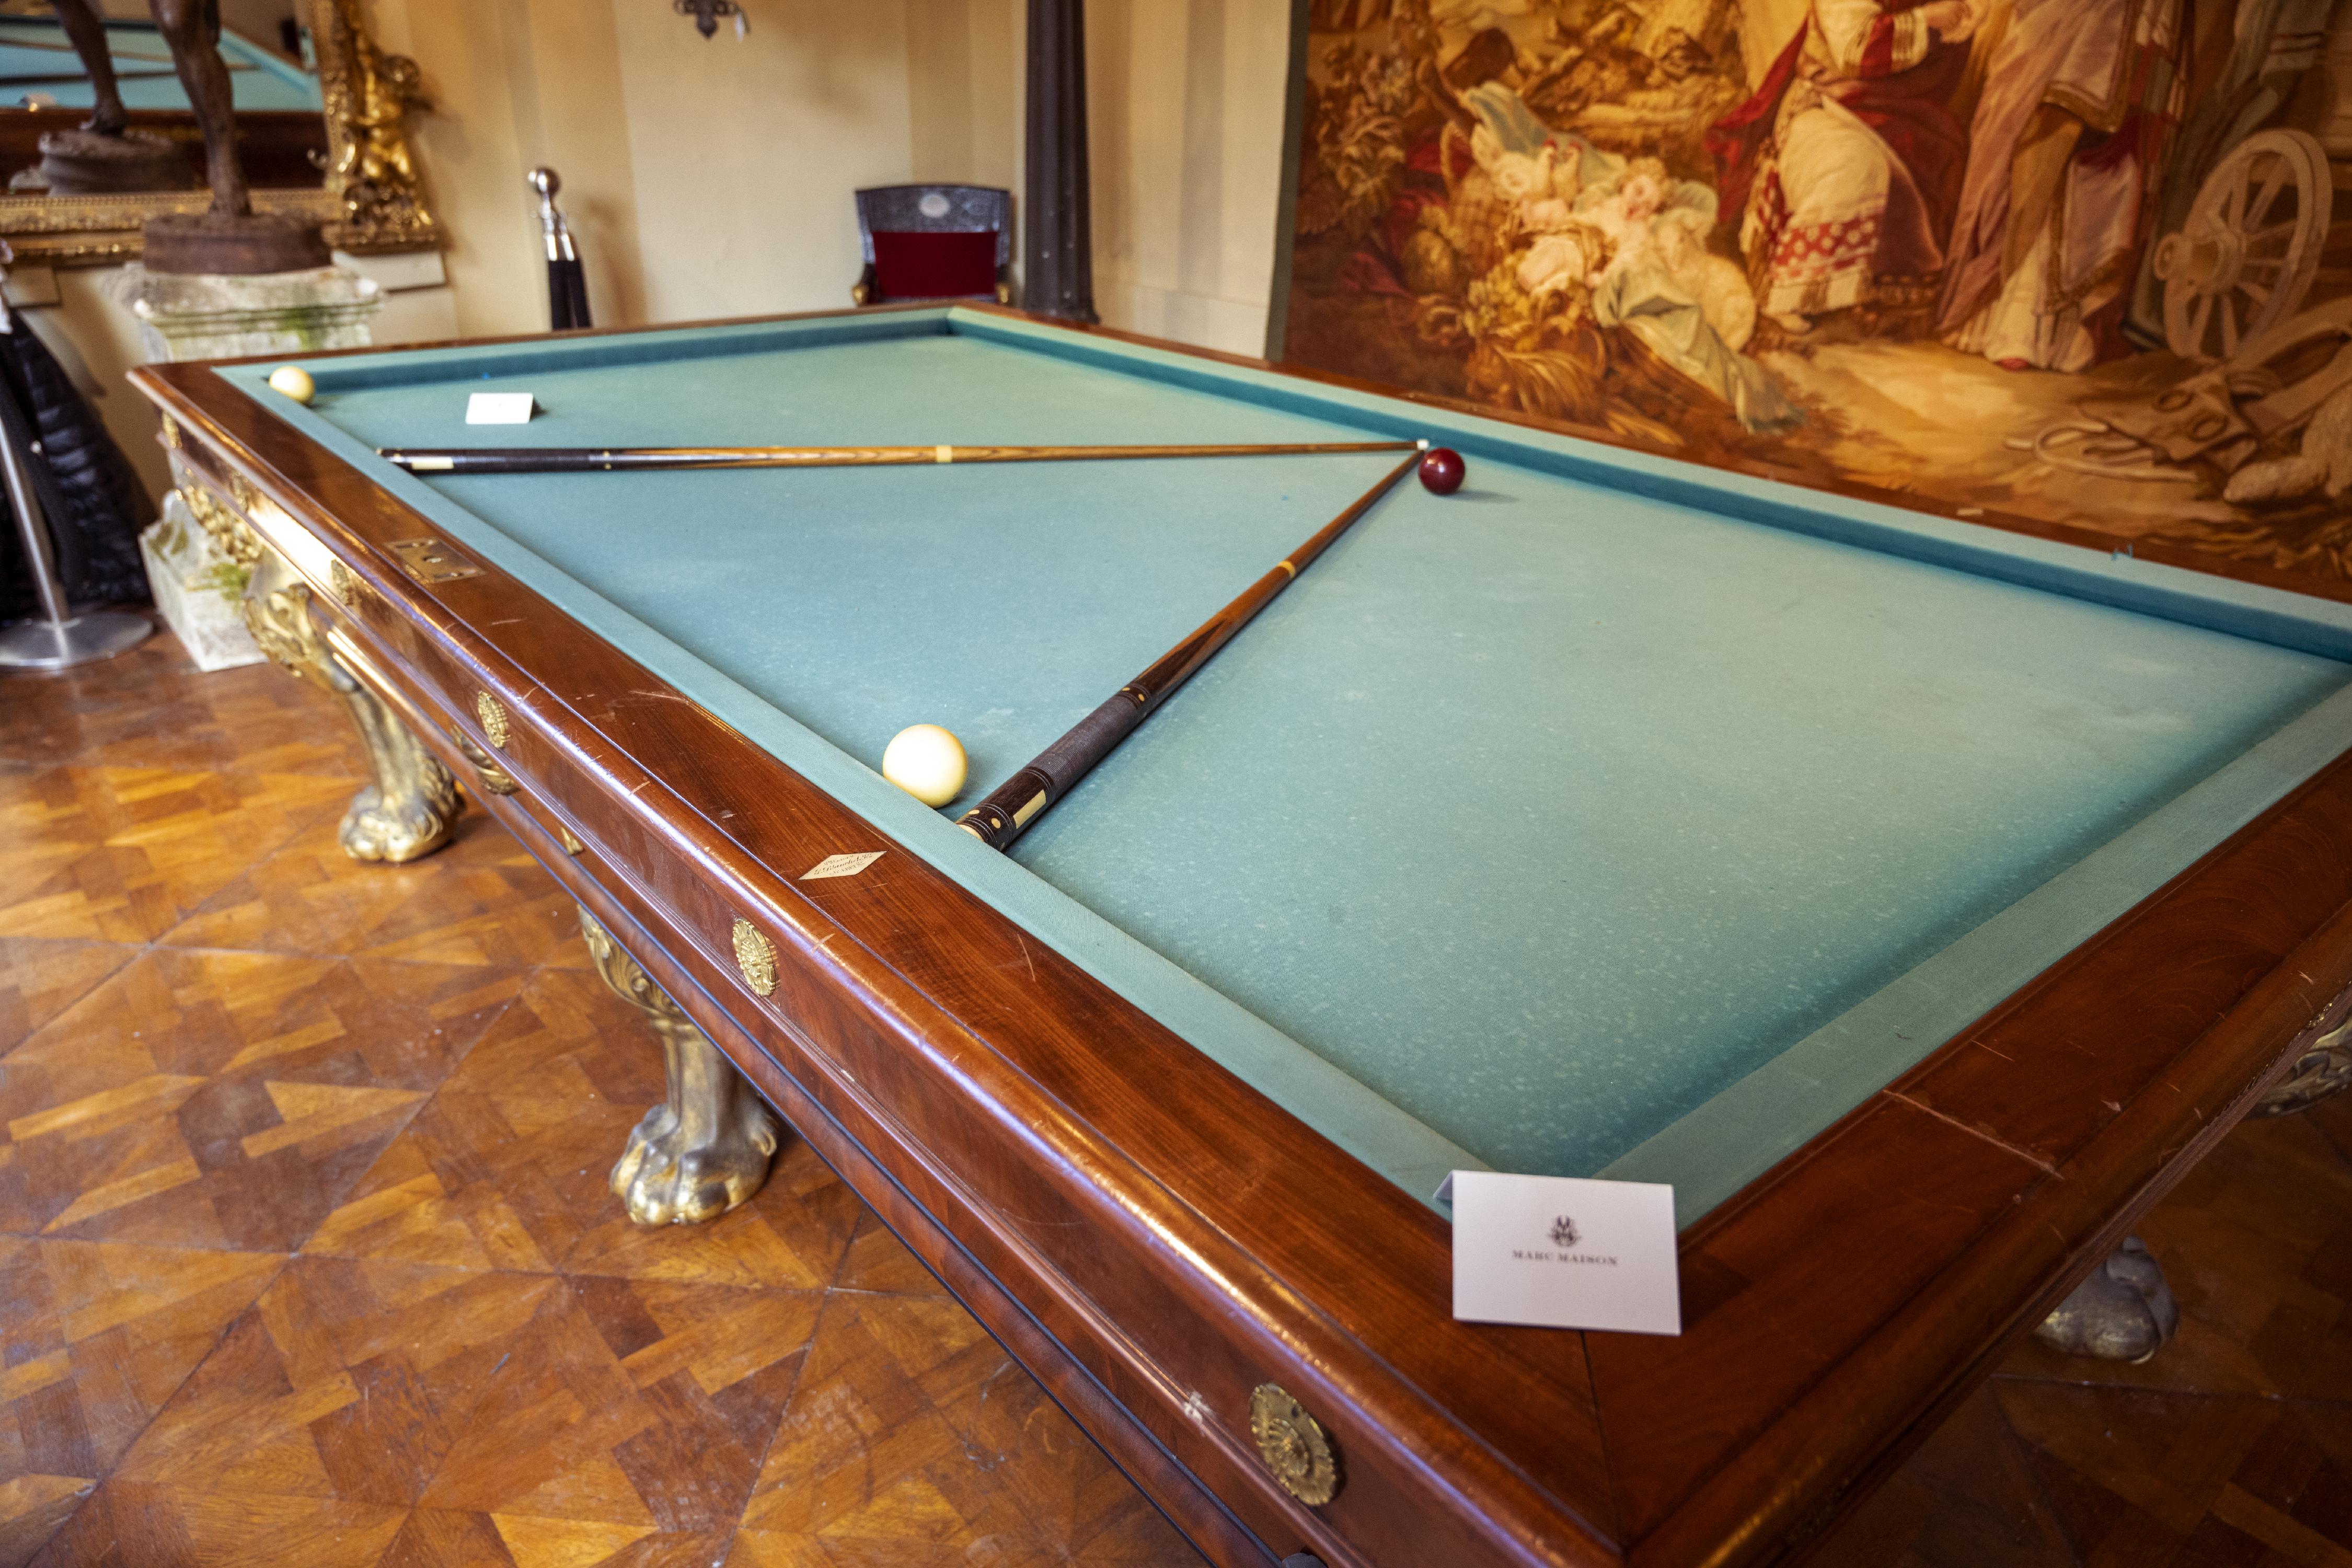 The Maison Chéreau, founded in 1816, is known for its particularly elaborate tables for high society and royalty, such as our six-legged solid bronze table. Typical of French billiards, our table is played on a pocketless table (without holes), with